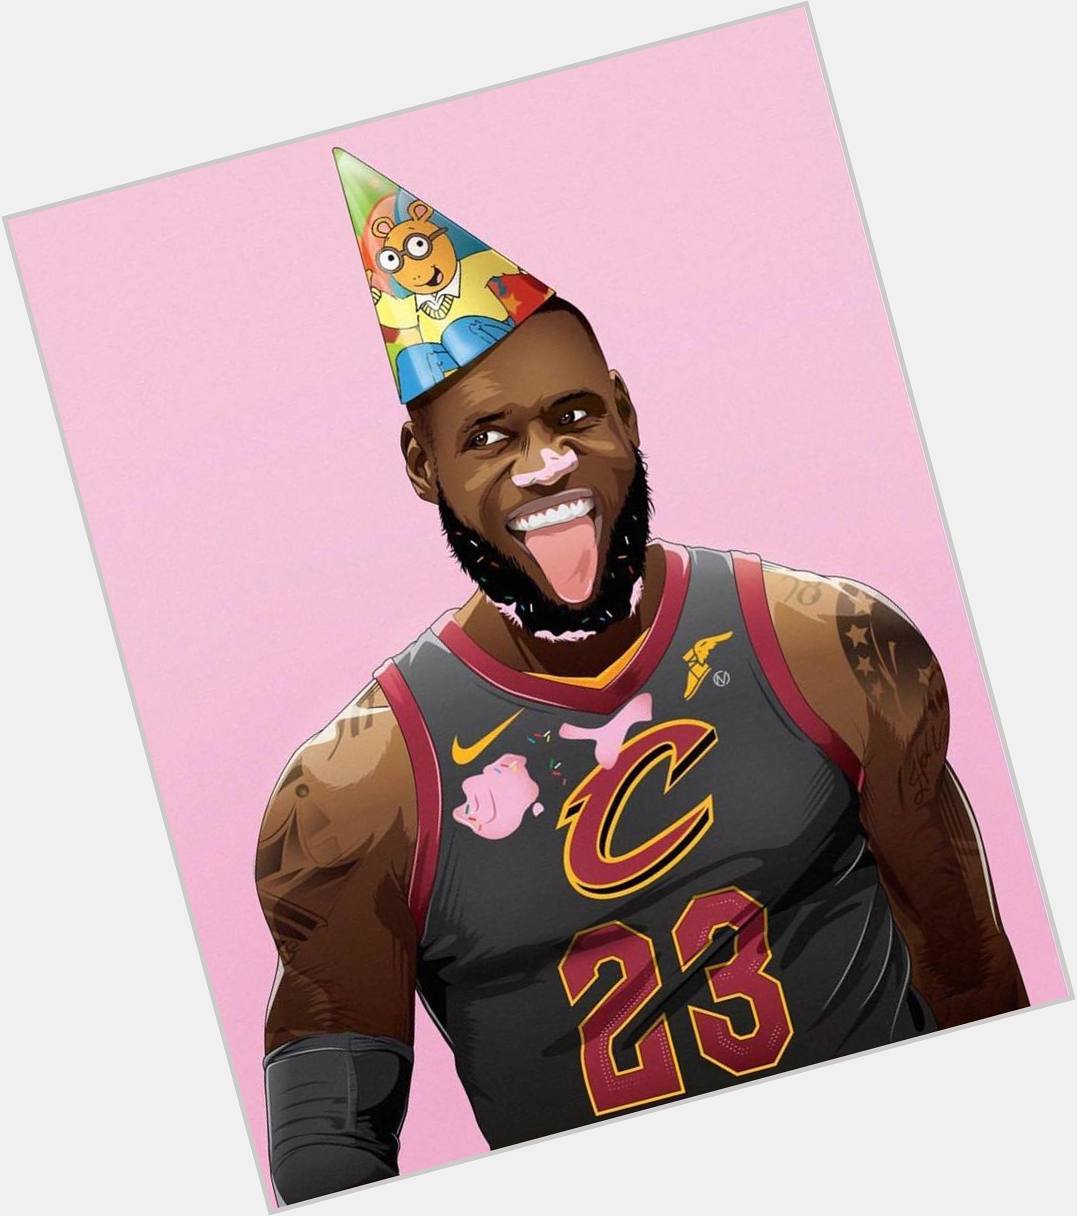 Happy Birthday to LeBron James who turns 33 years old today    by cmineses_designs 